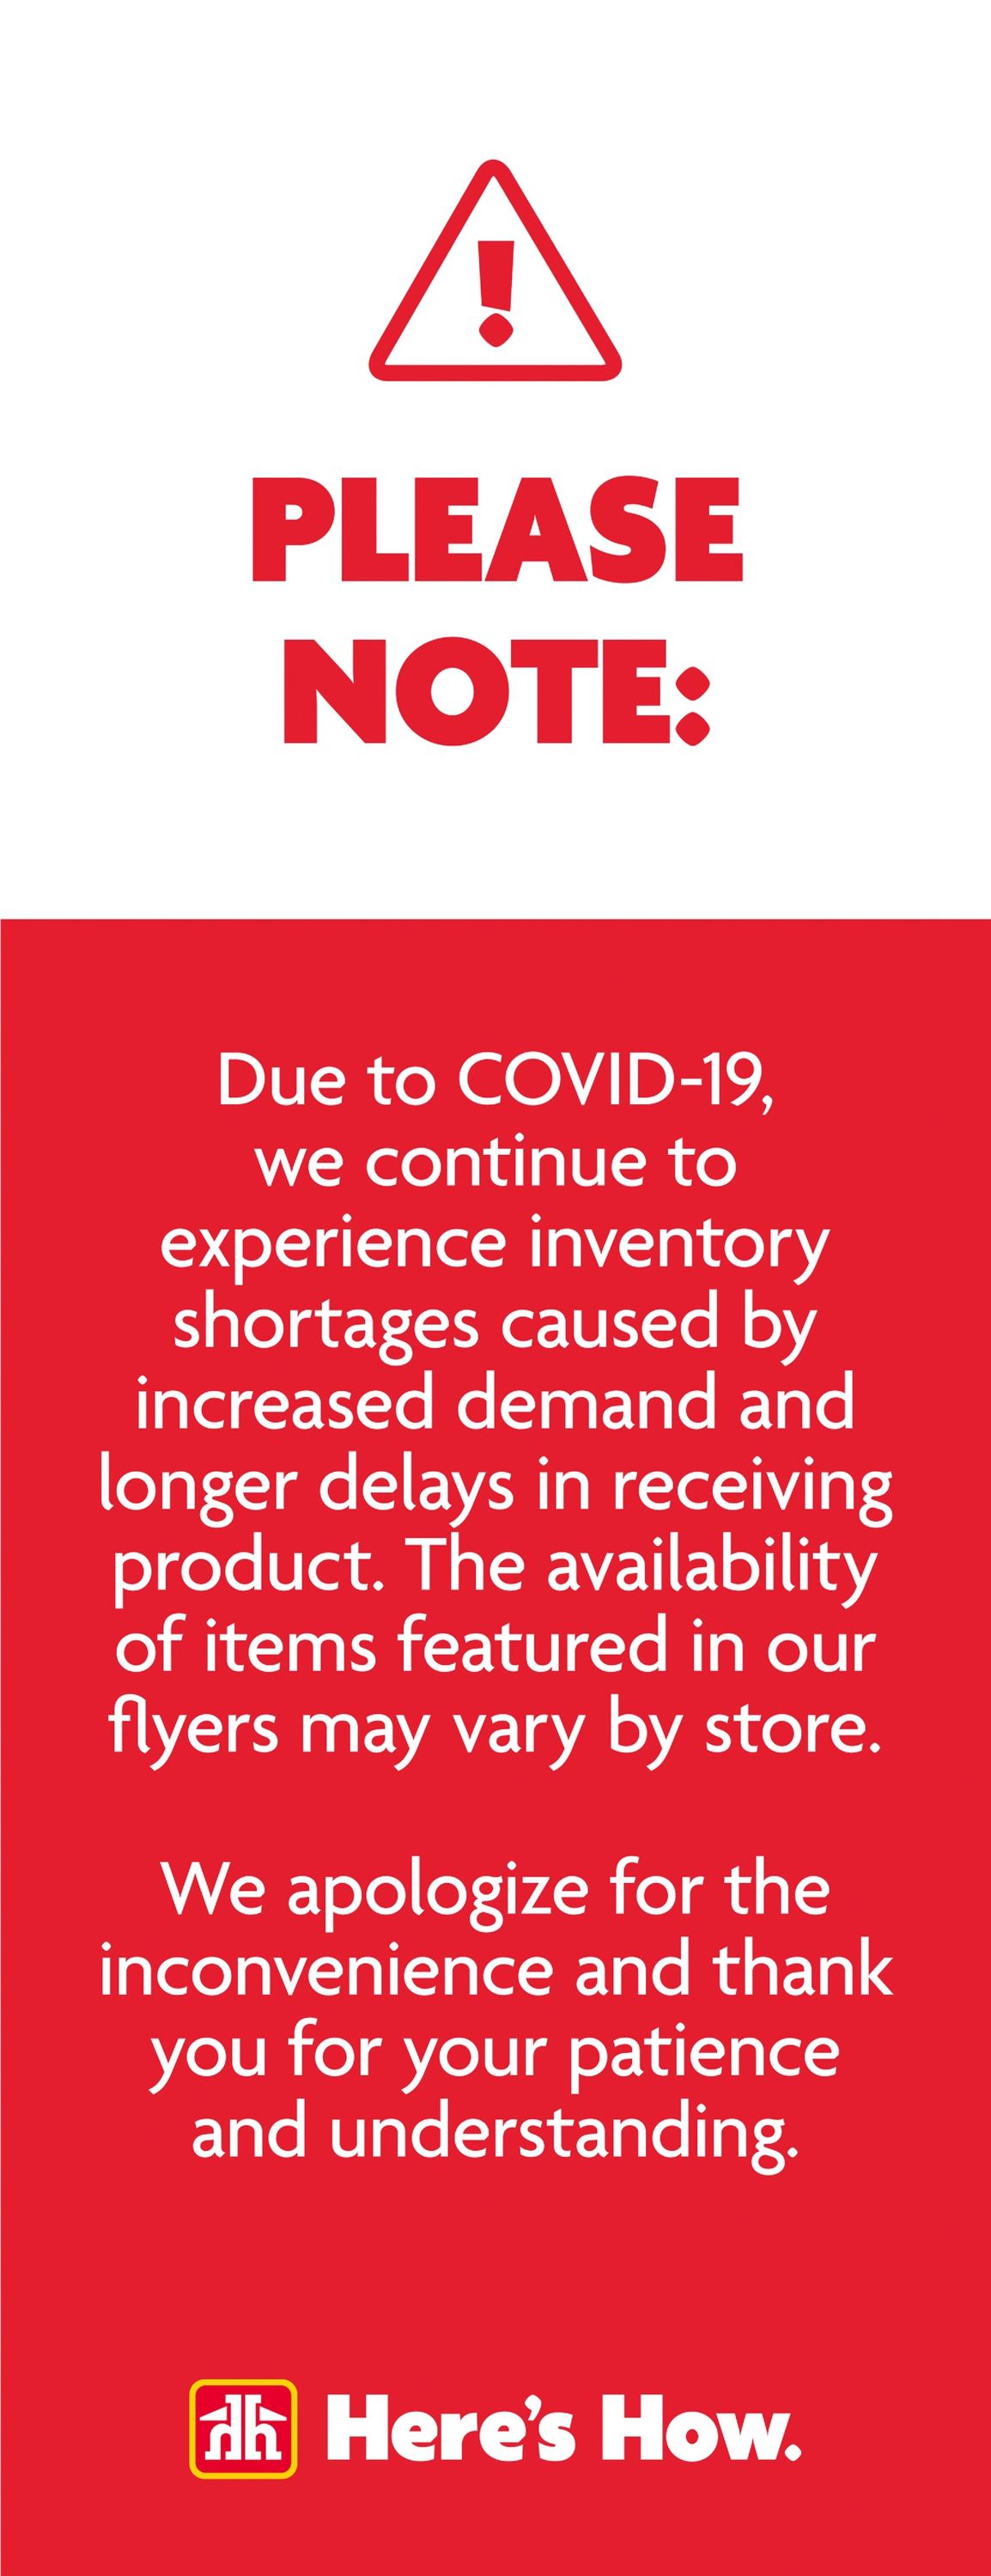 Home Hardware Flyer from 07/22/2021